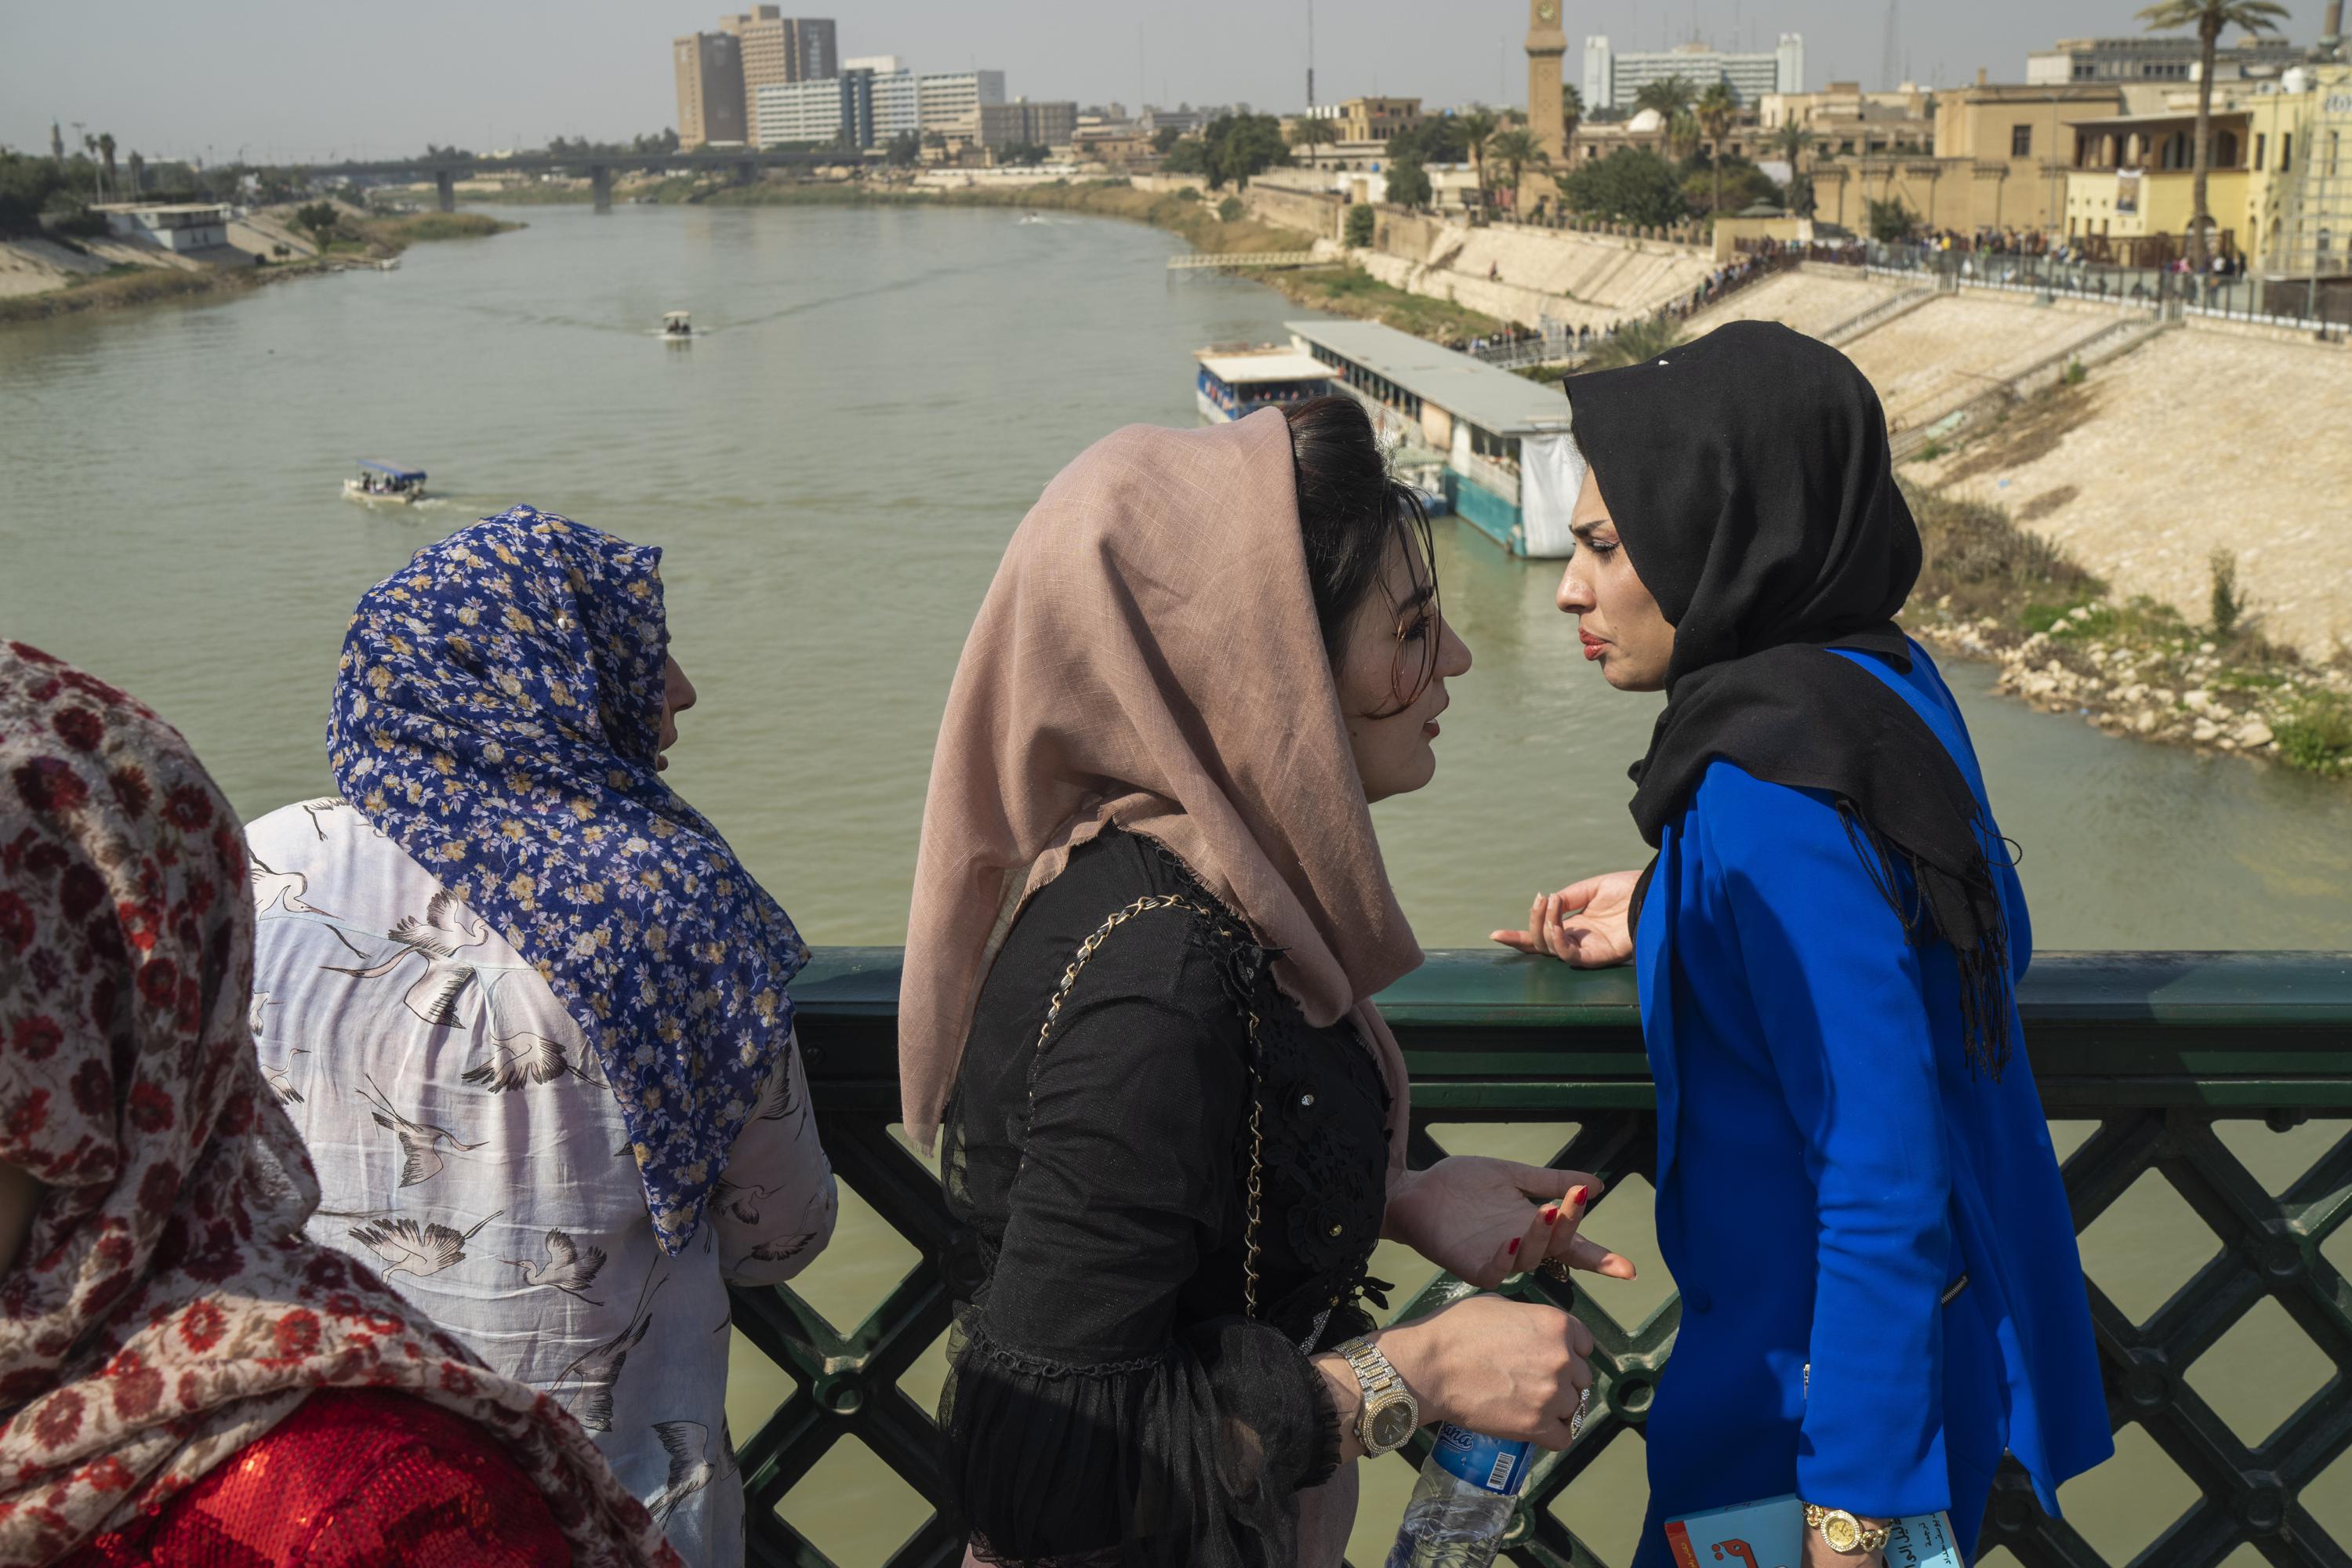 20 years after U.S. invasion, young Iraqis see signs of hope